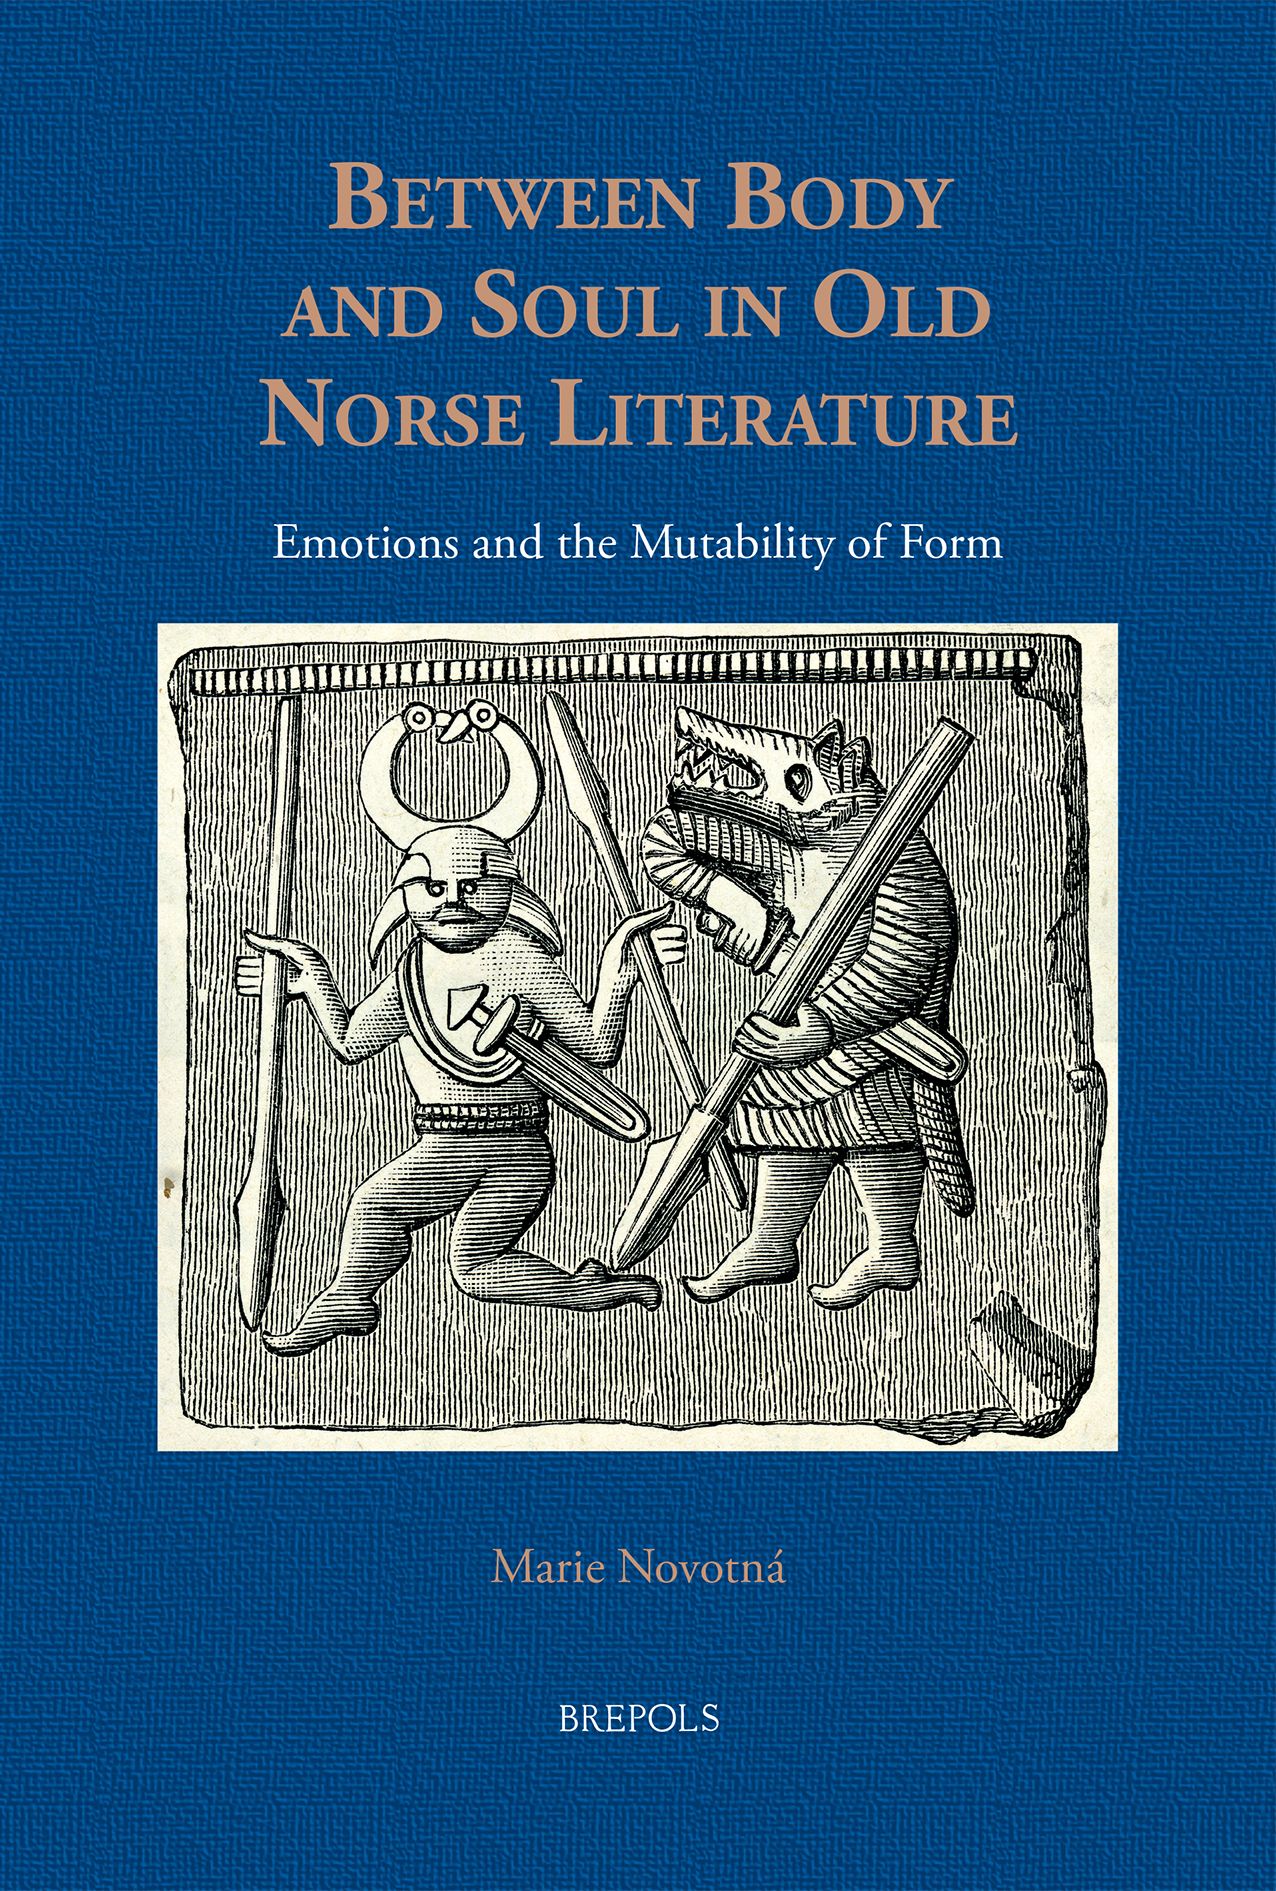 Marie Novotná, Between Body and Soul in Old Norse Literature. Emotions and the Mutability of Form